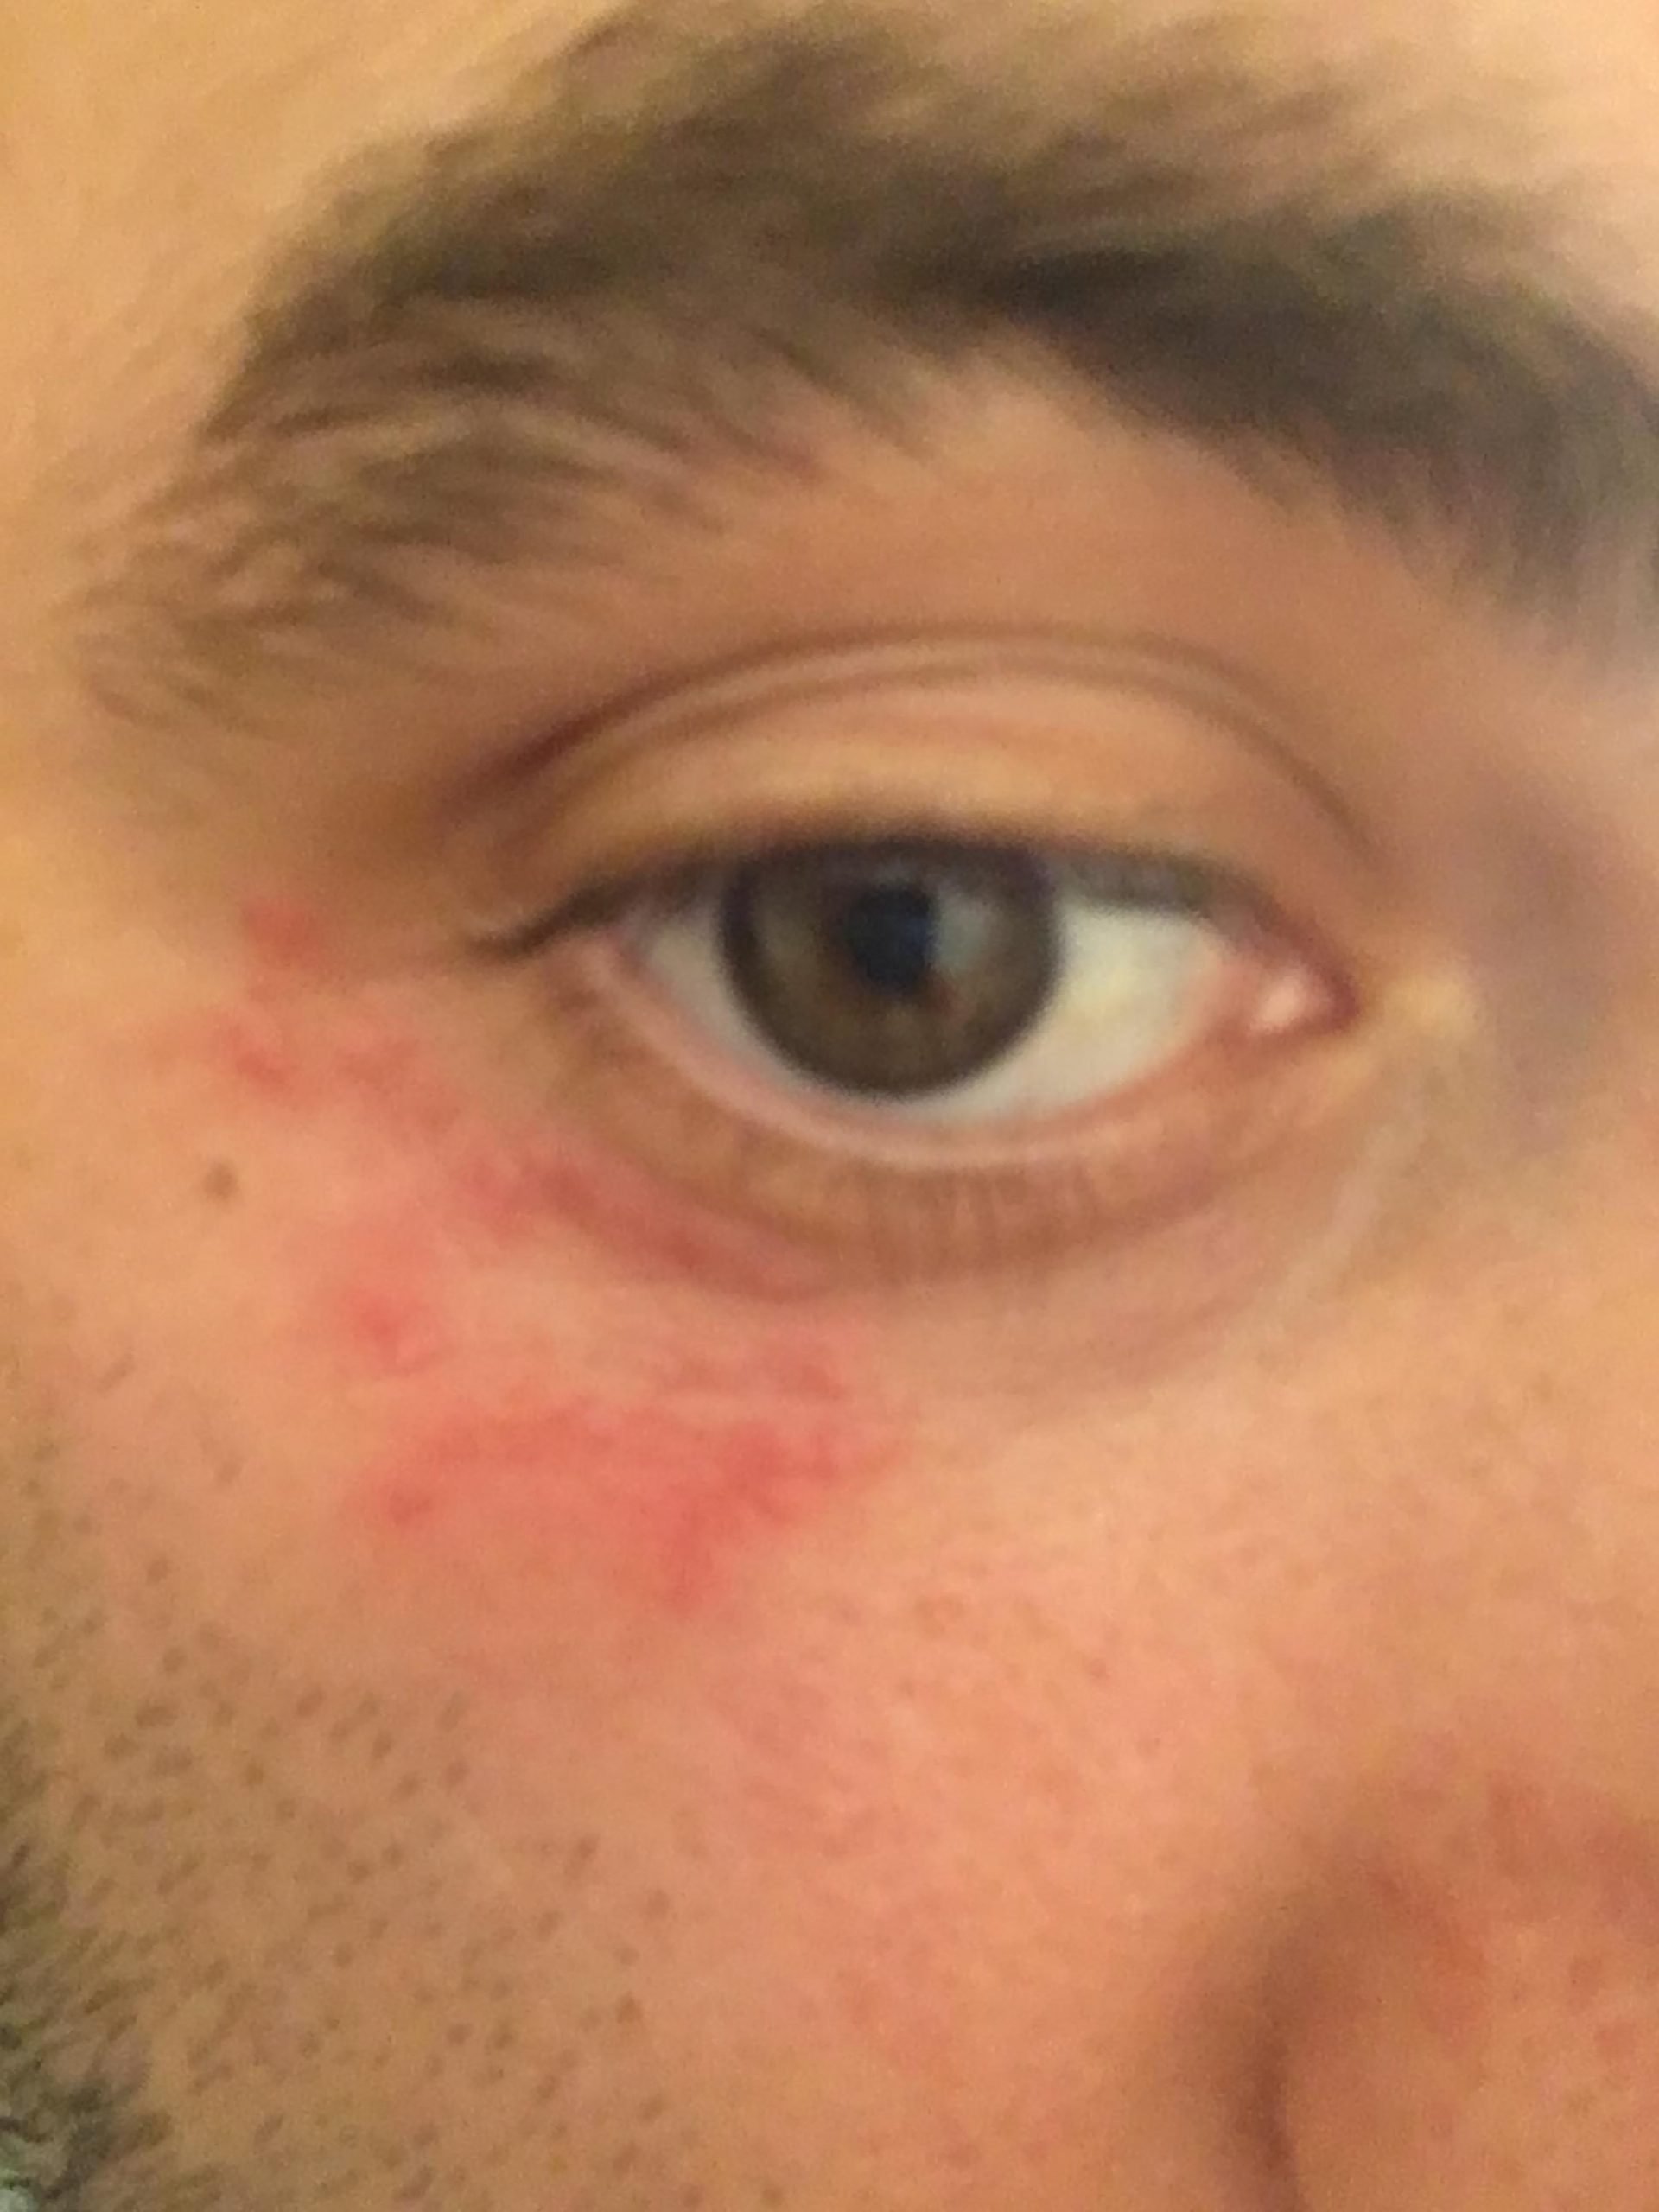 Stubborn eczema patch around my eyes. Curious if others have seen this ...